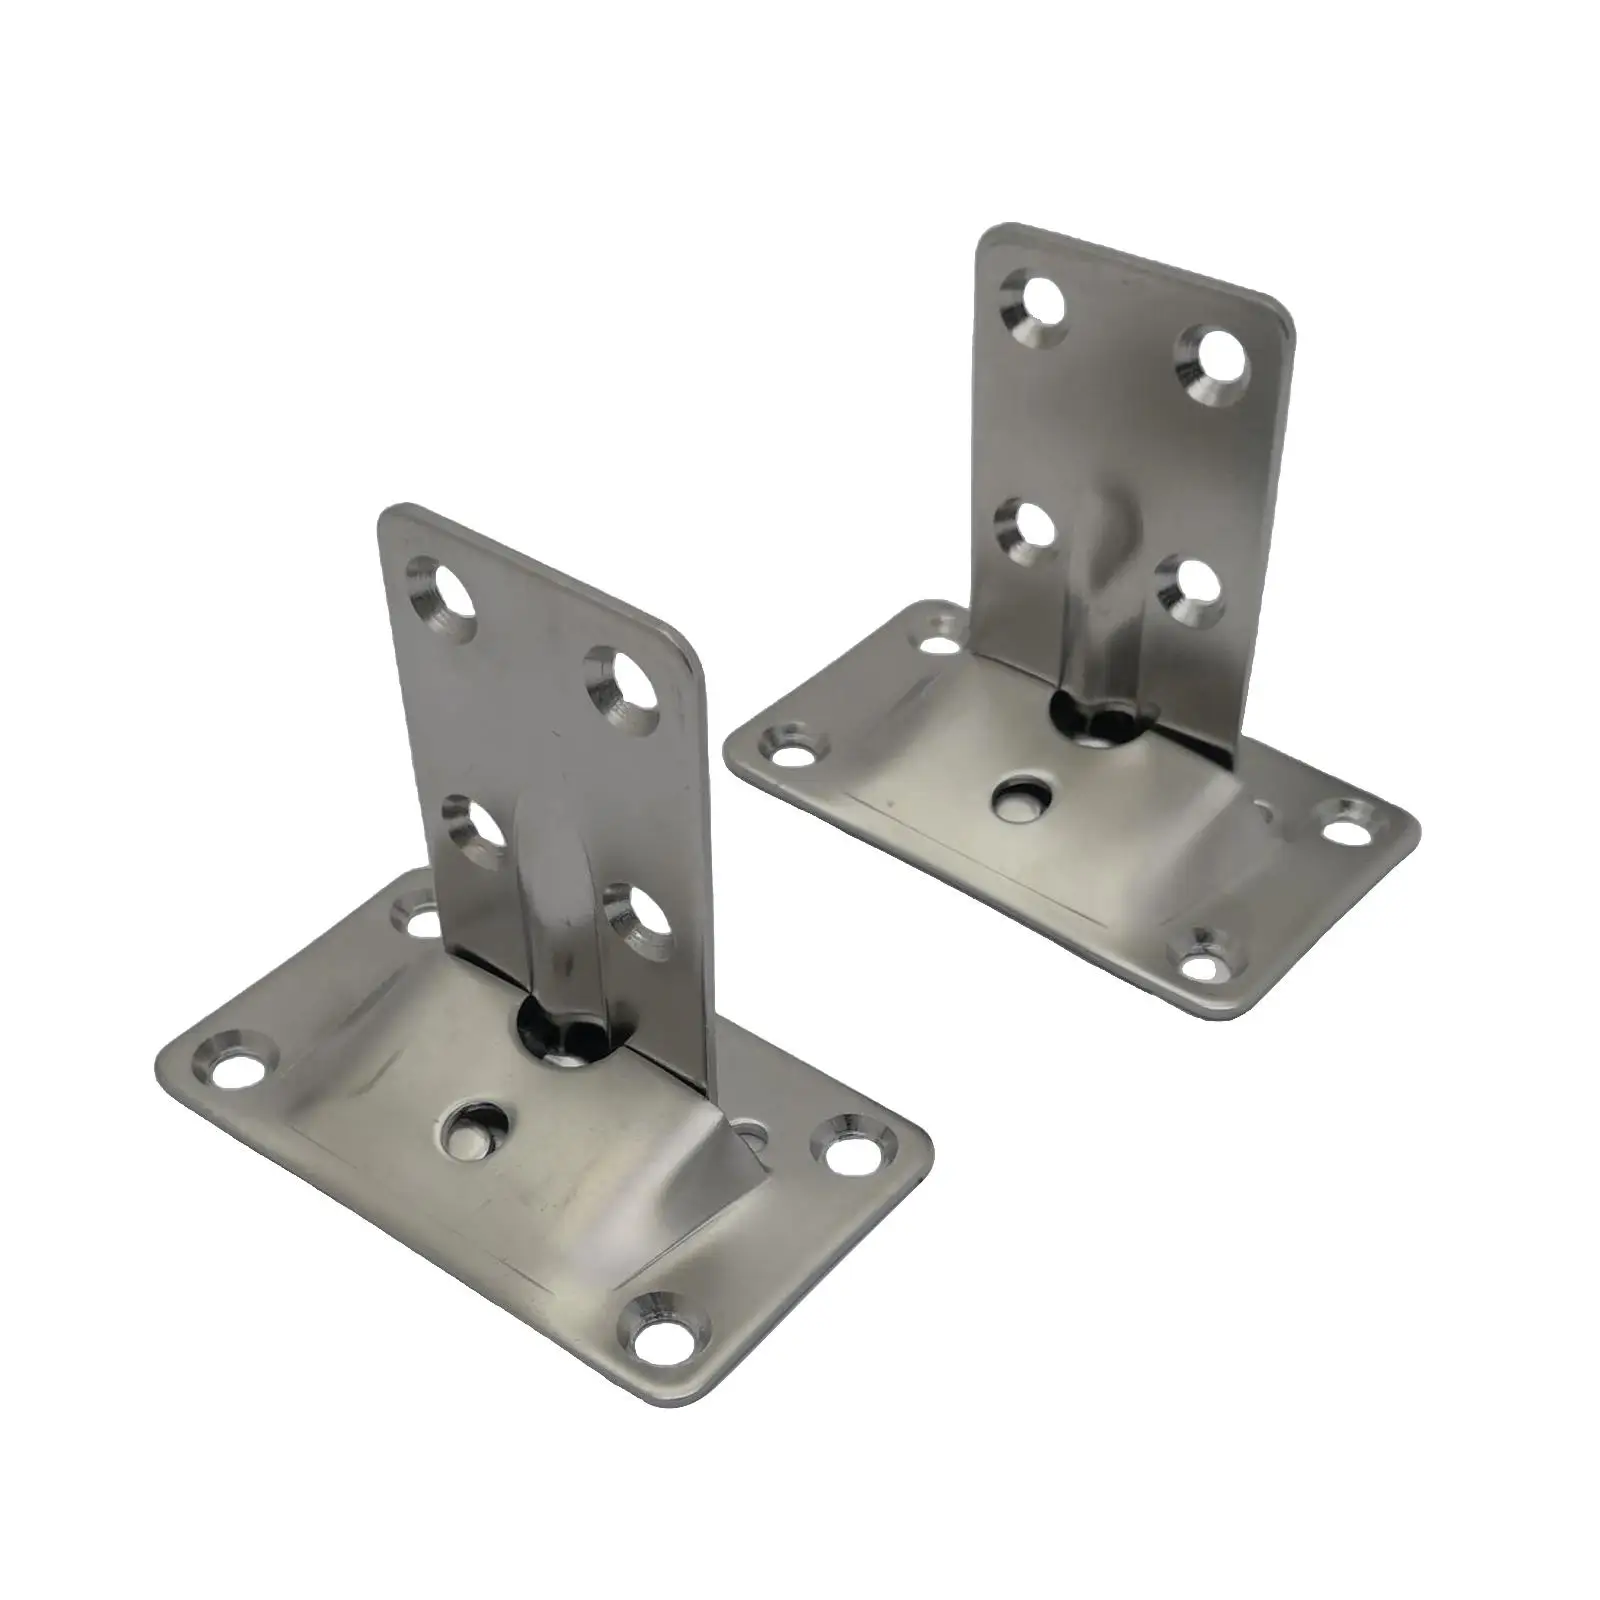 Stainless Steel Bracket Set Removable Multiple Usage Accessories